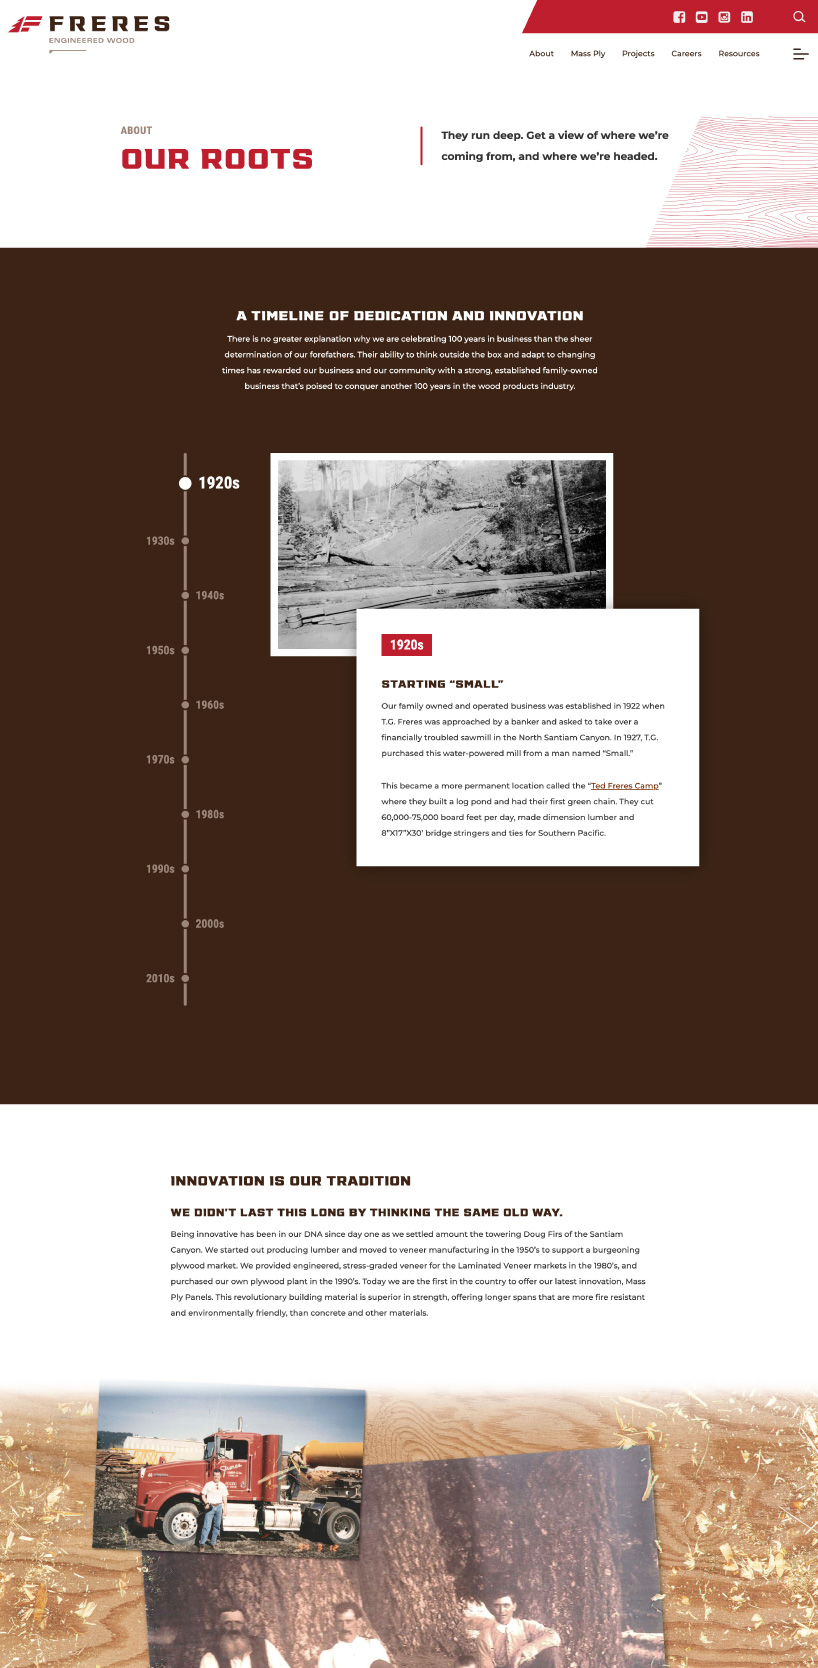 freres website redesign history page